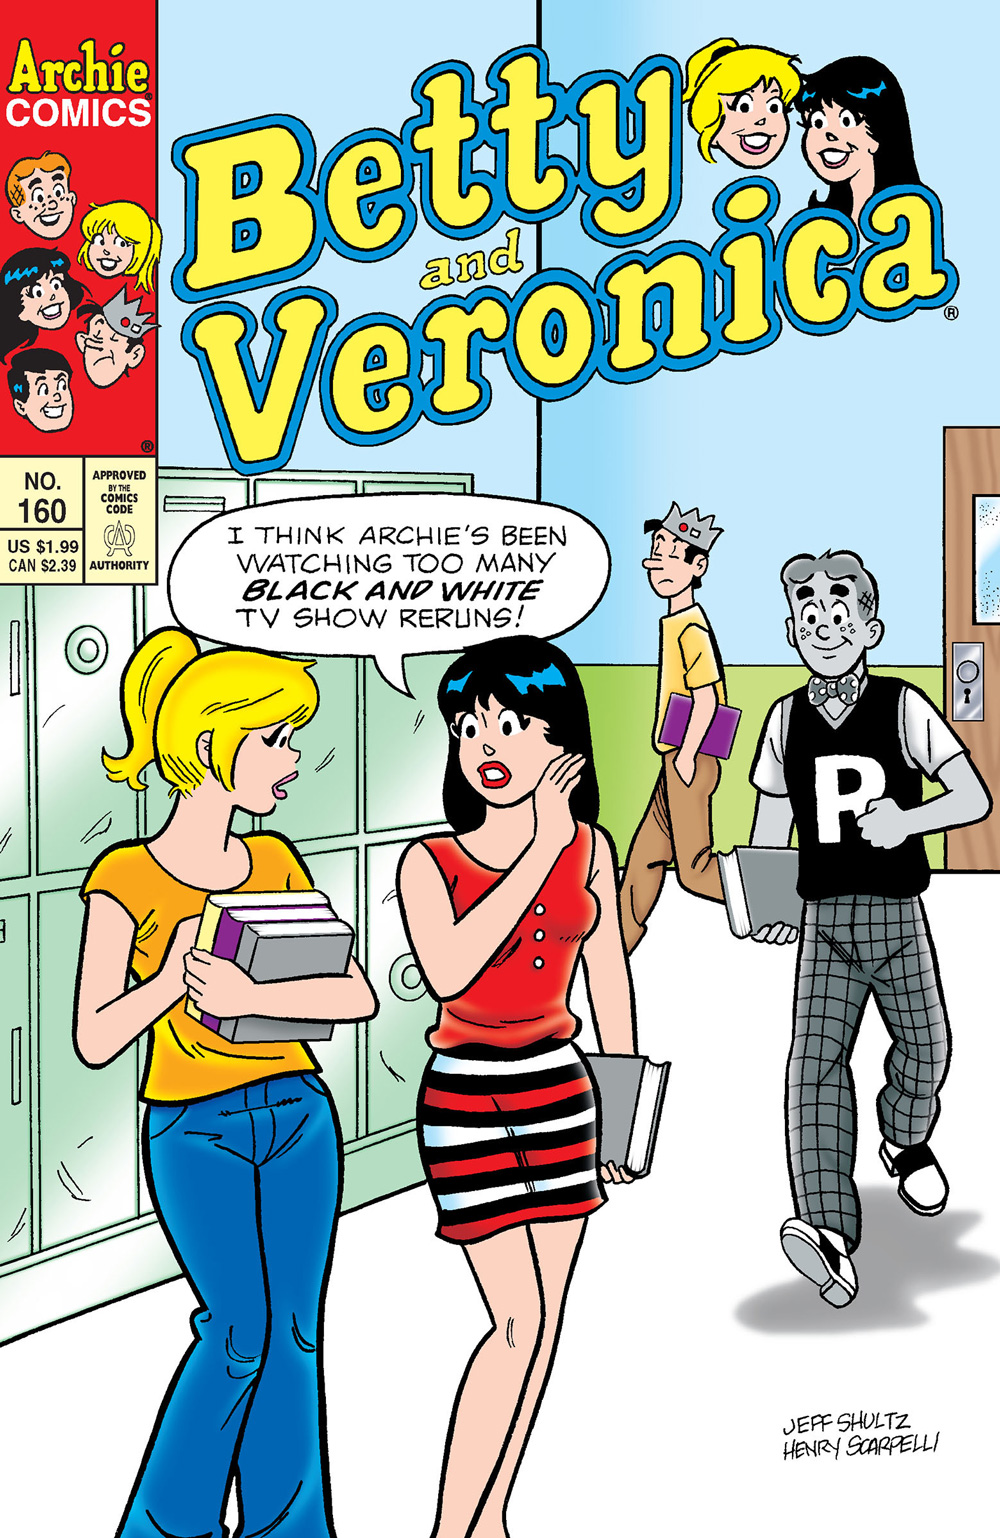 Veronica and Betty talk in the hallway of Riverdale High School, while Archie walks up to them. They're in full-color but he is in black and white. Veronica says he's been watching too many black and white TV reruns.